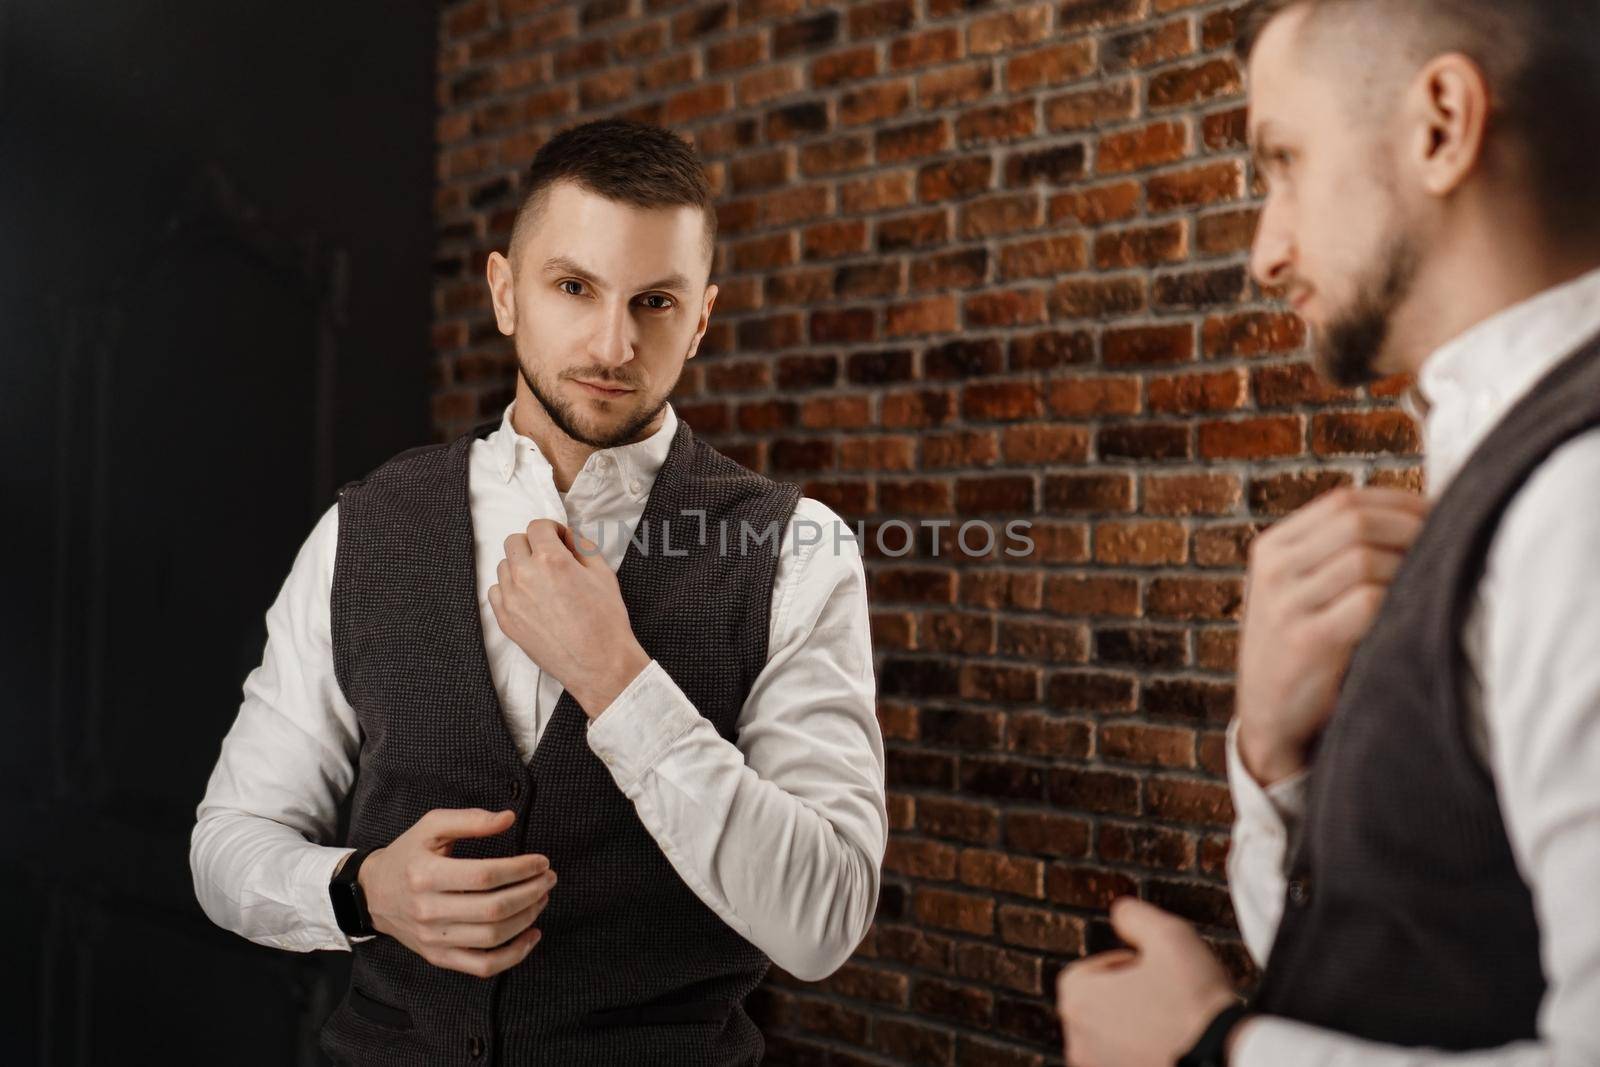 Stylish confident young man looking at himself in mirror. Fitting a suit in a store or sewing studio - loft interior